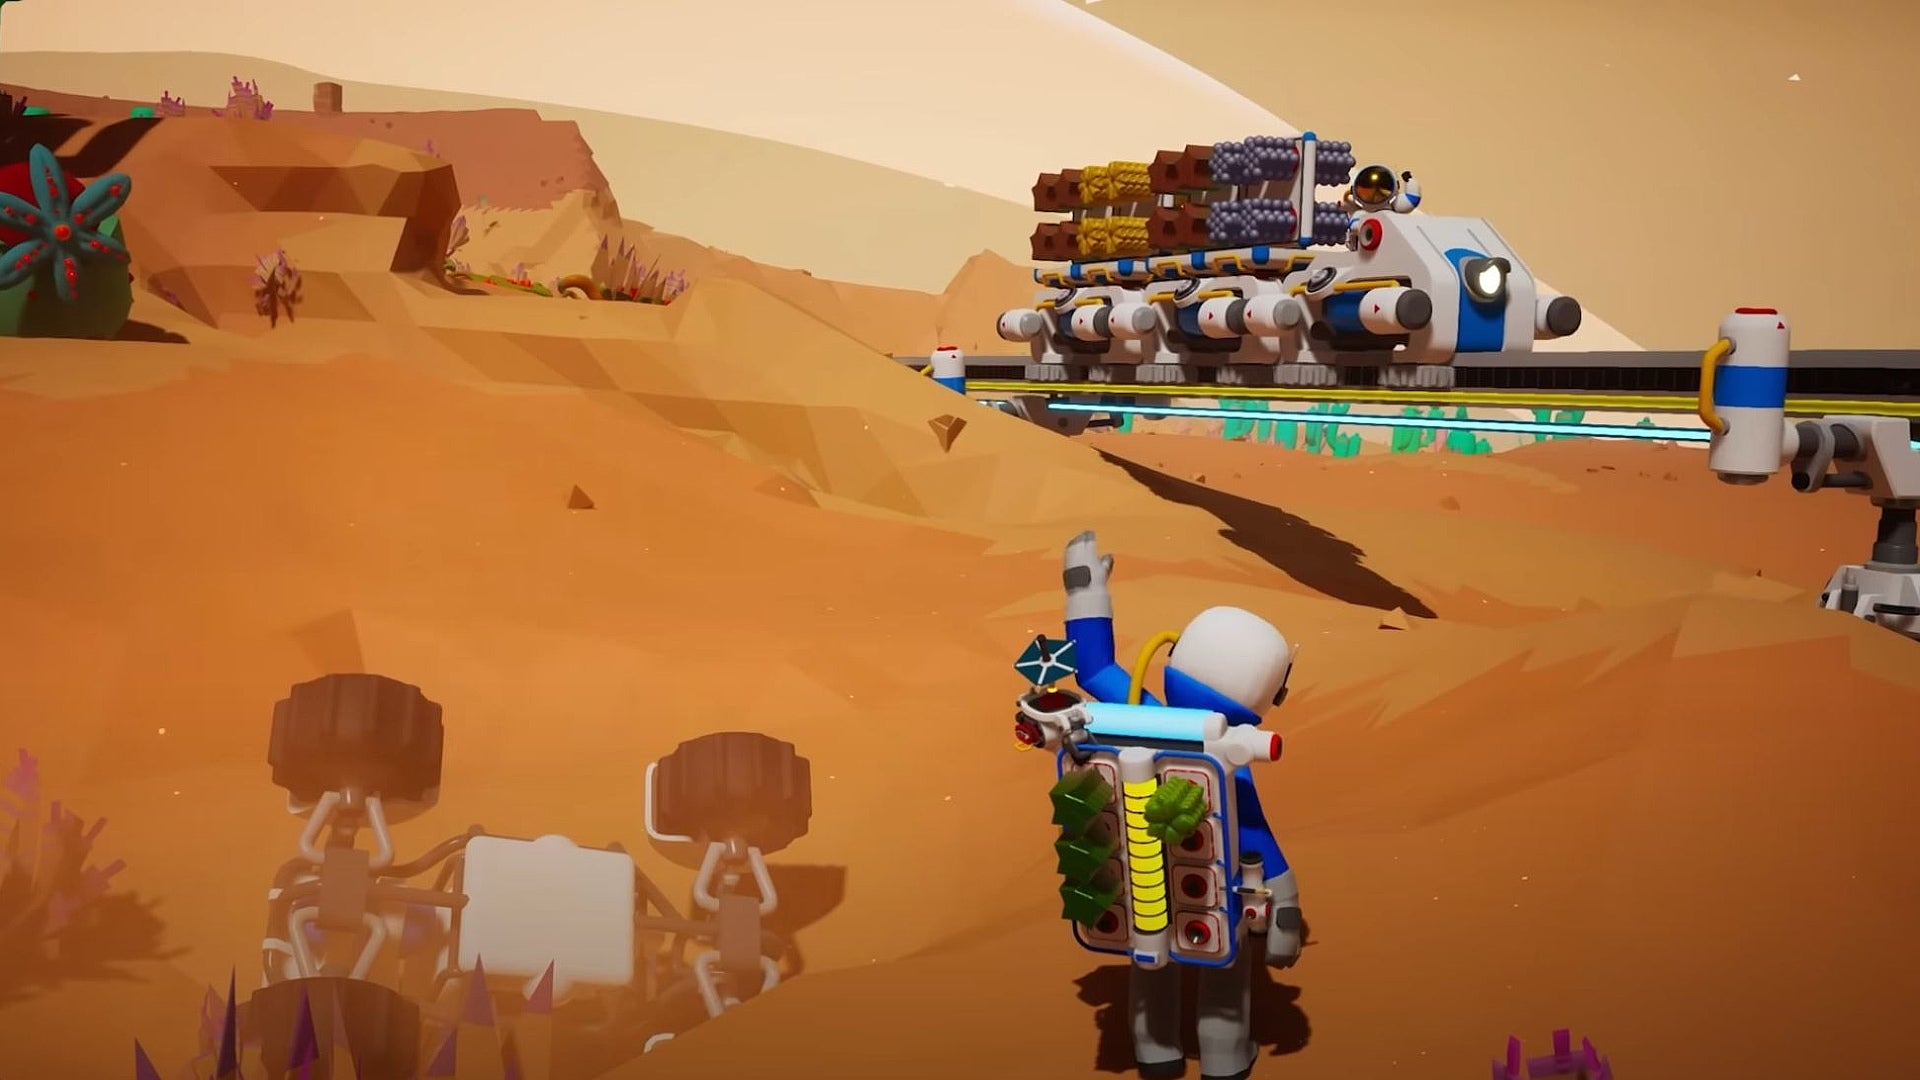 Space sandbox sim Astroneer has just received a free update introducing monorails.